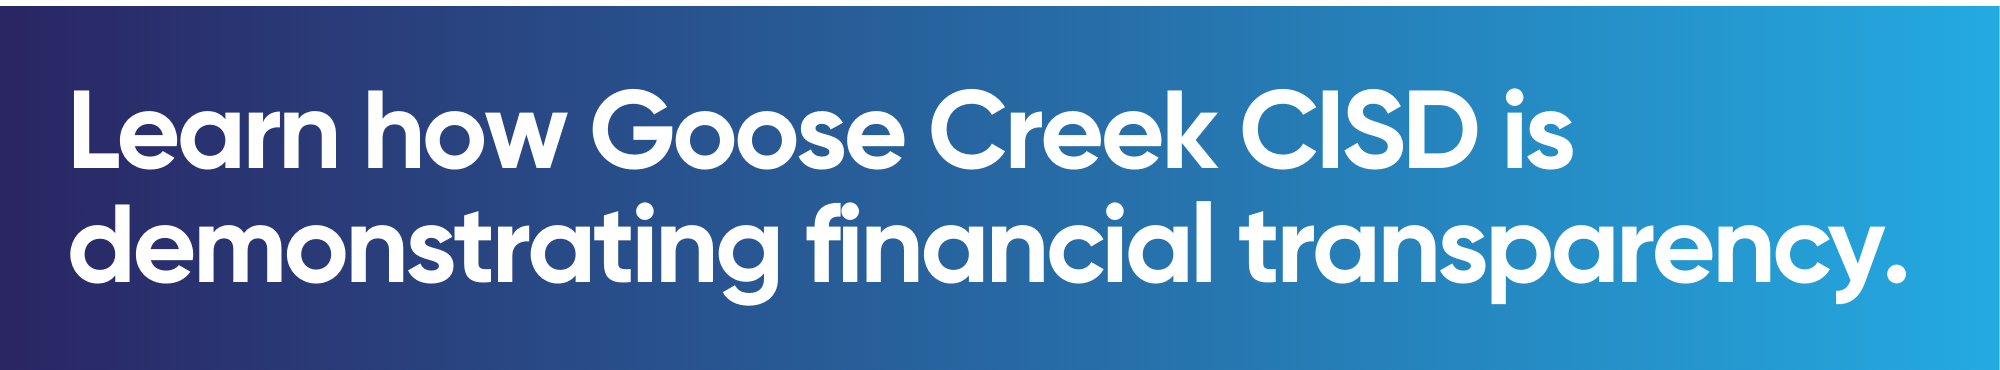 Learn how goose creek cisd is demonstrating financial transparency.